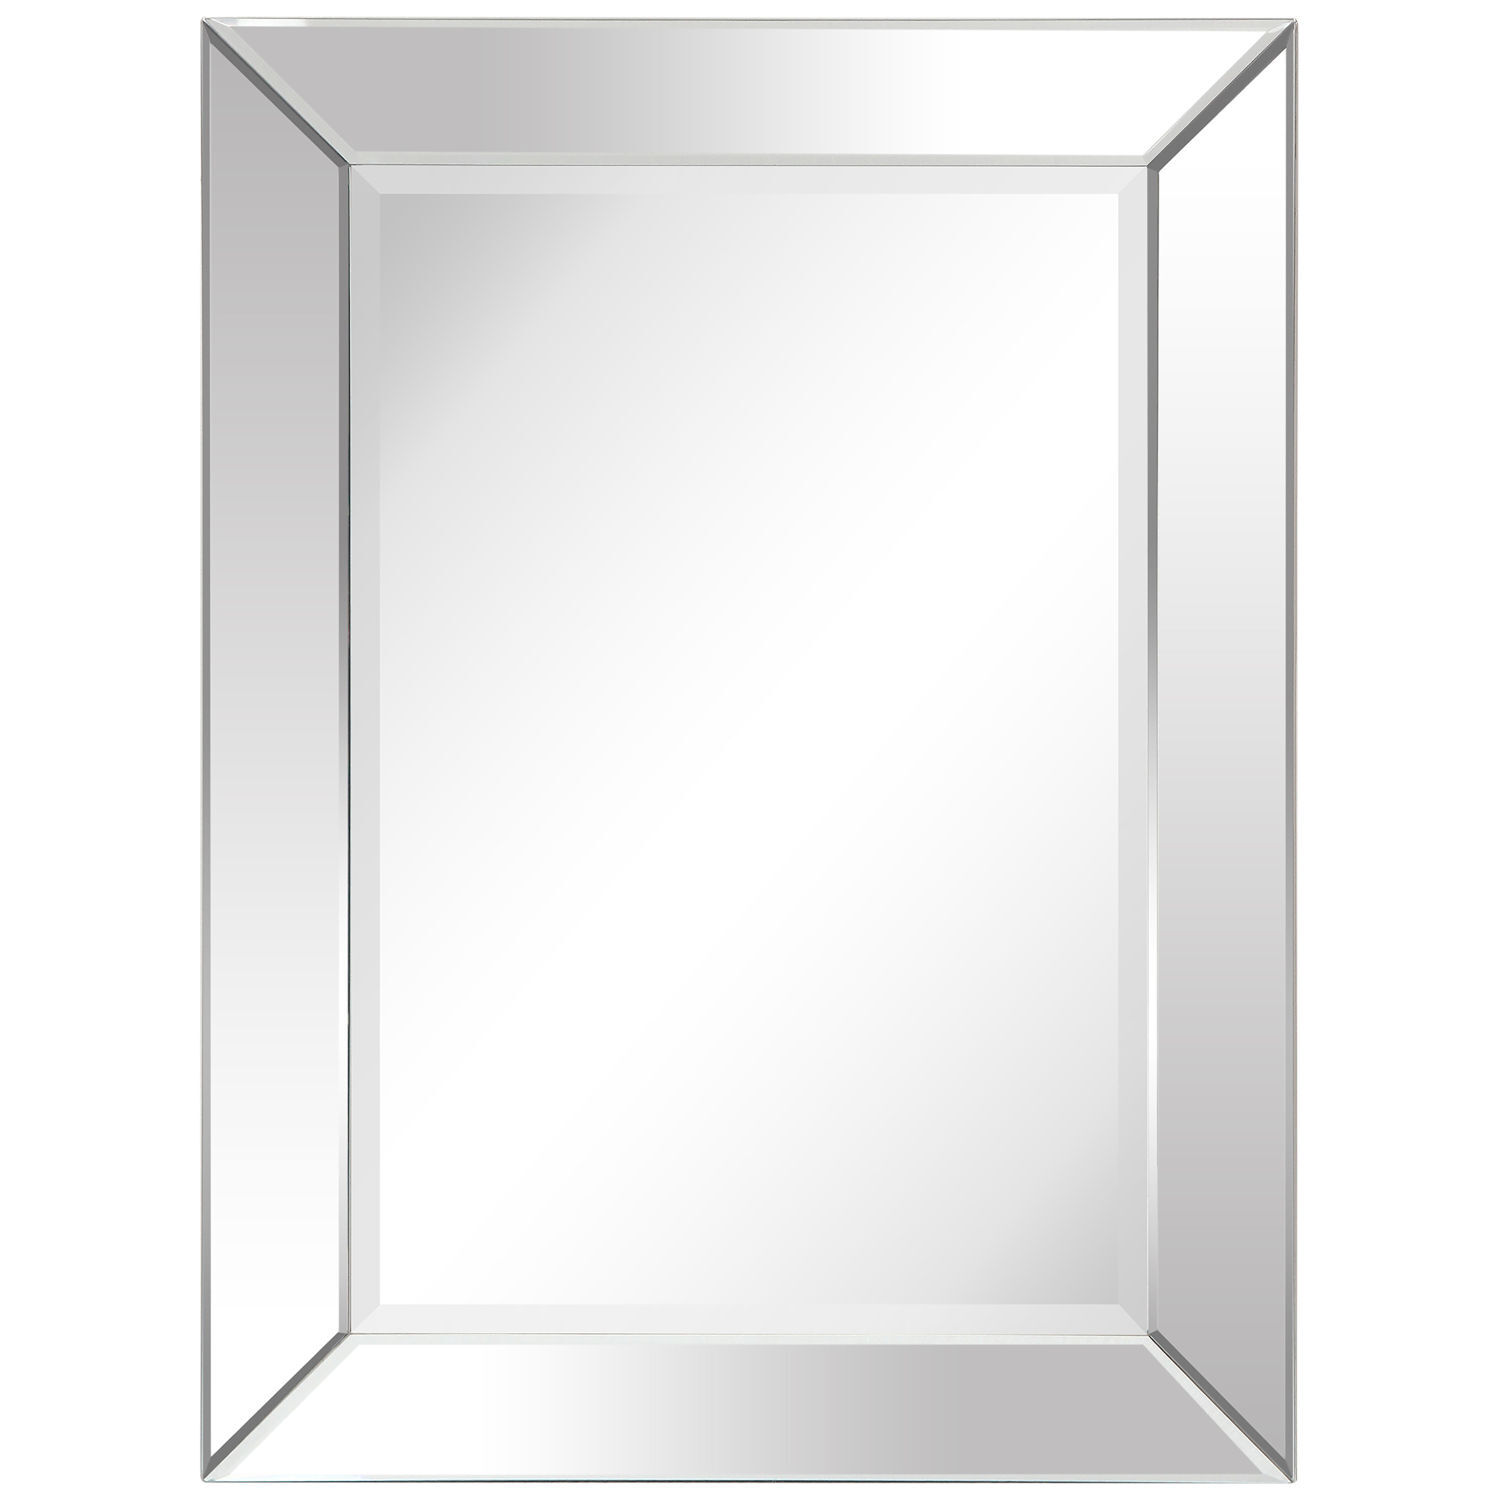 Empire Art Direct Moderno Clear 40 x 30-Inch Rectangle Wall Mirror